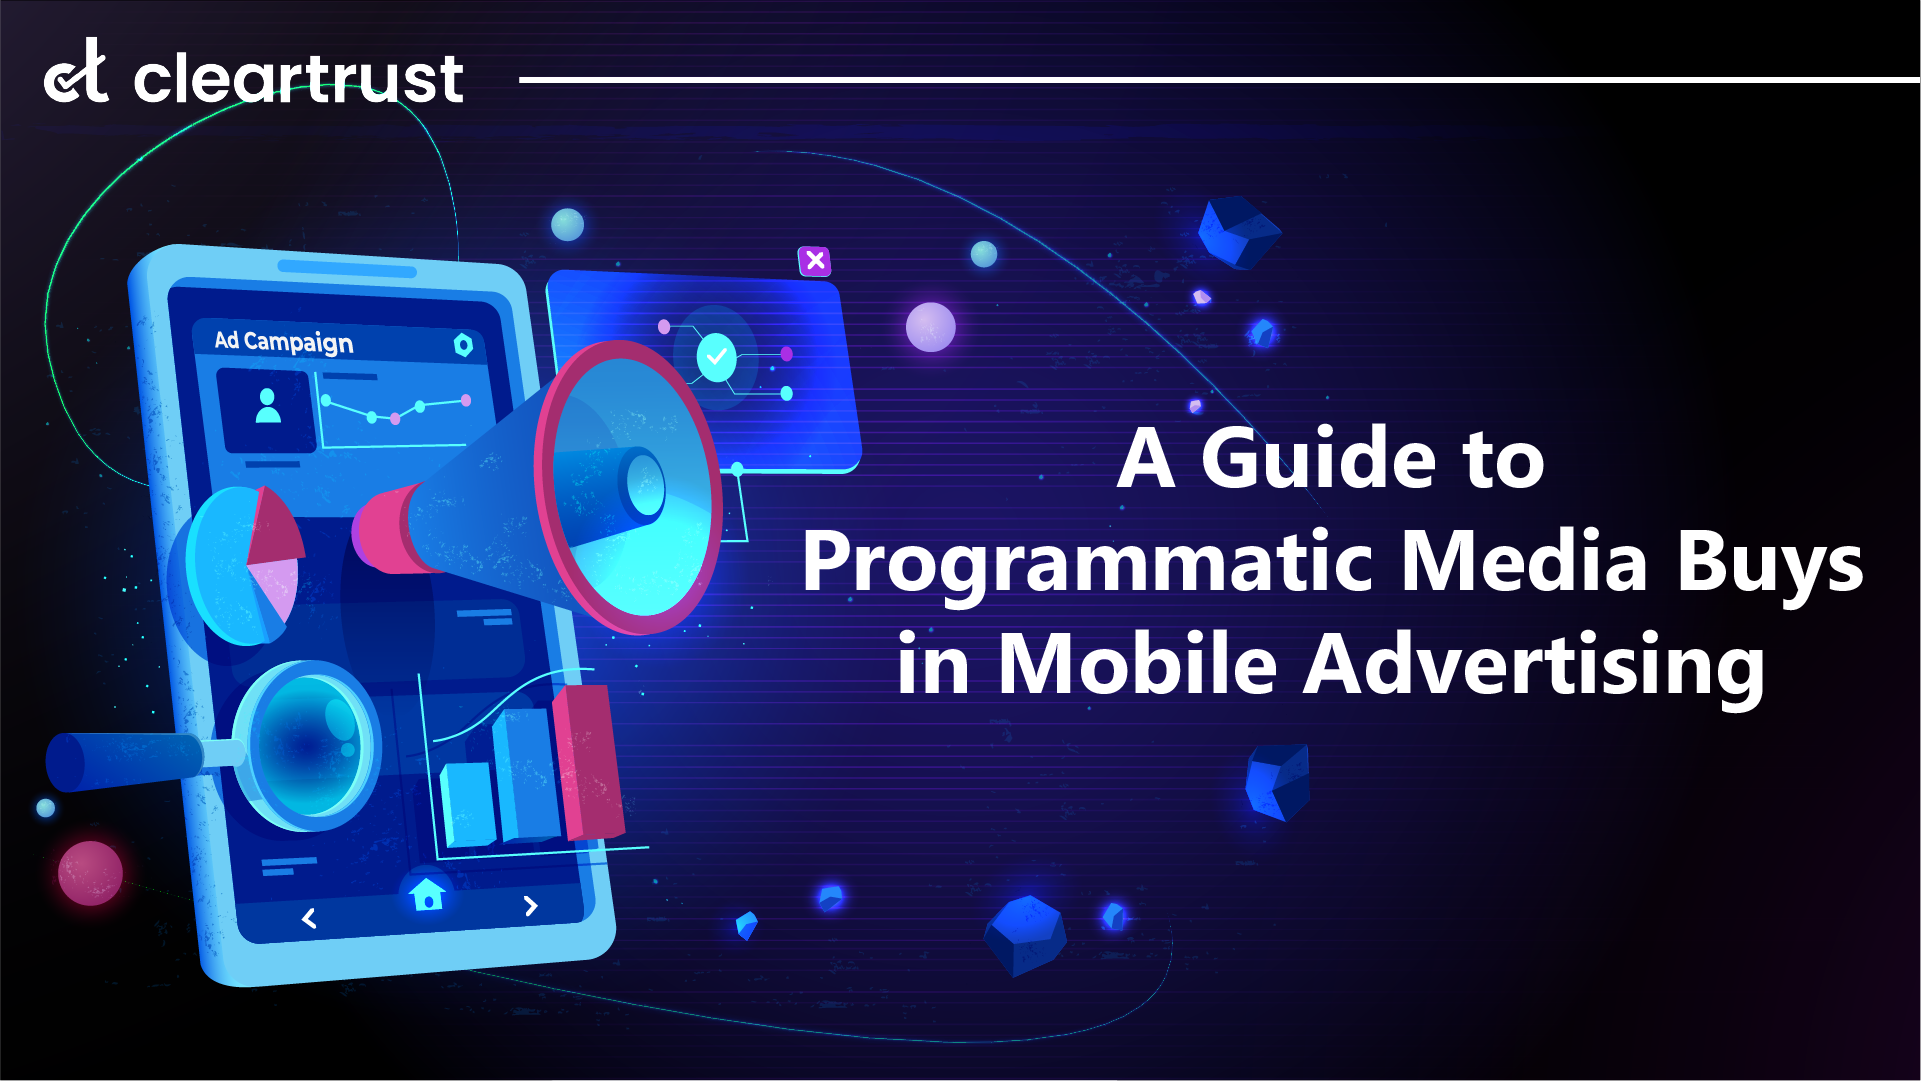 A Guide to Programmatic Media Buys in Mobile Advertising